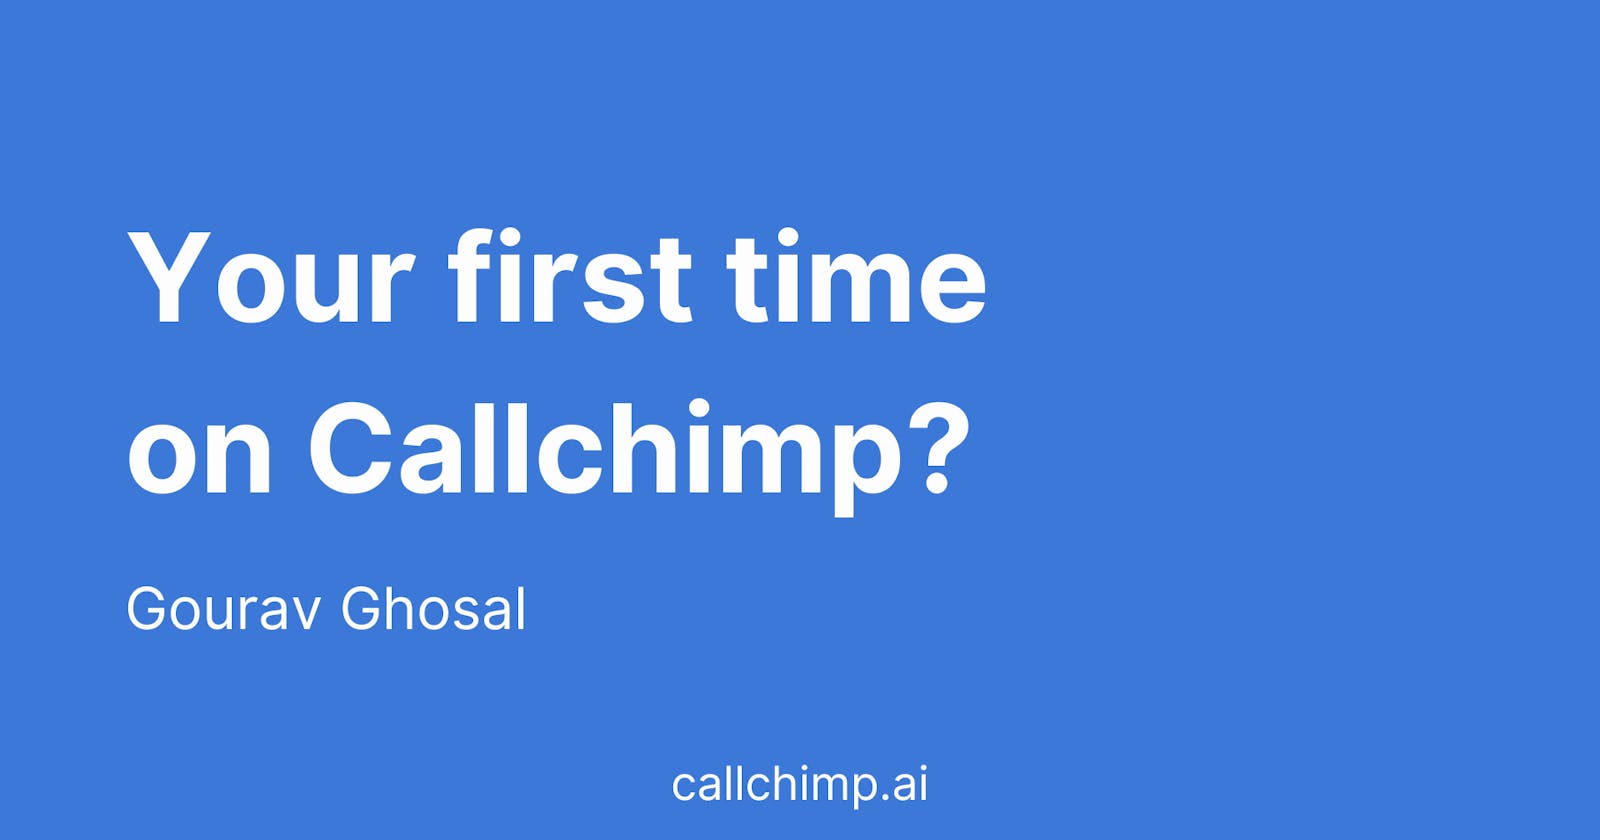 Your first time on Callchimp?